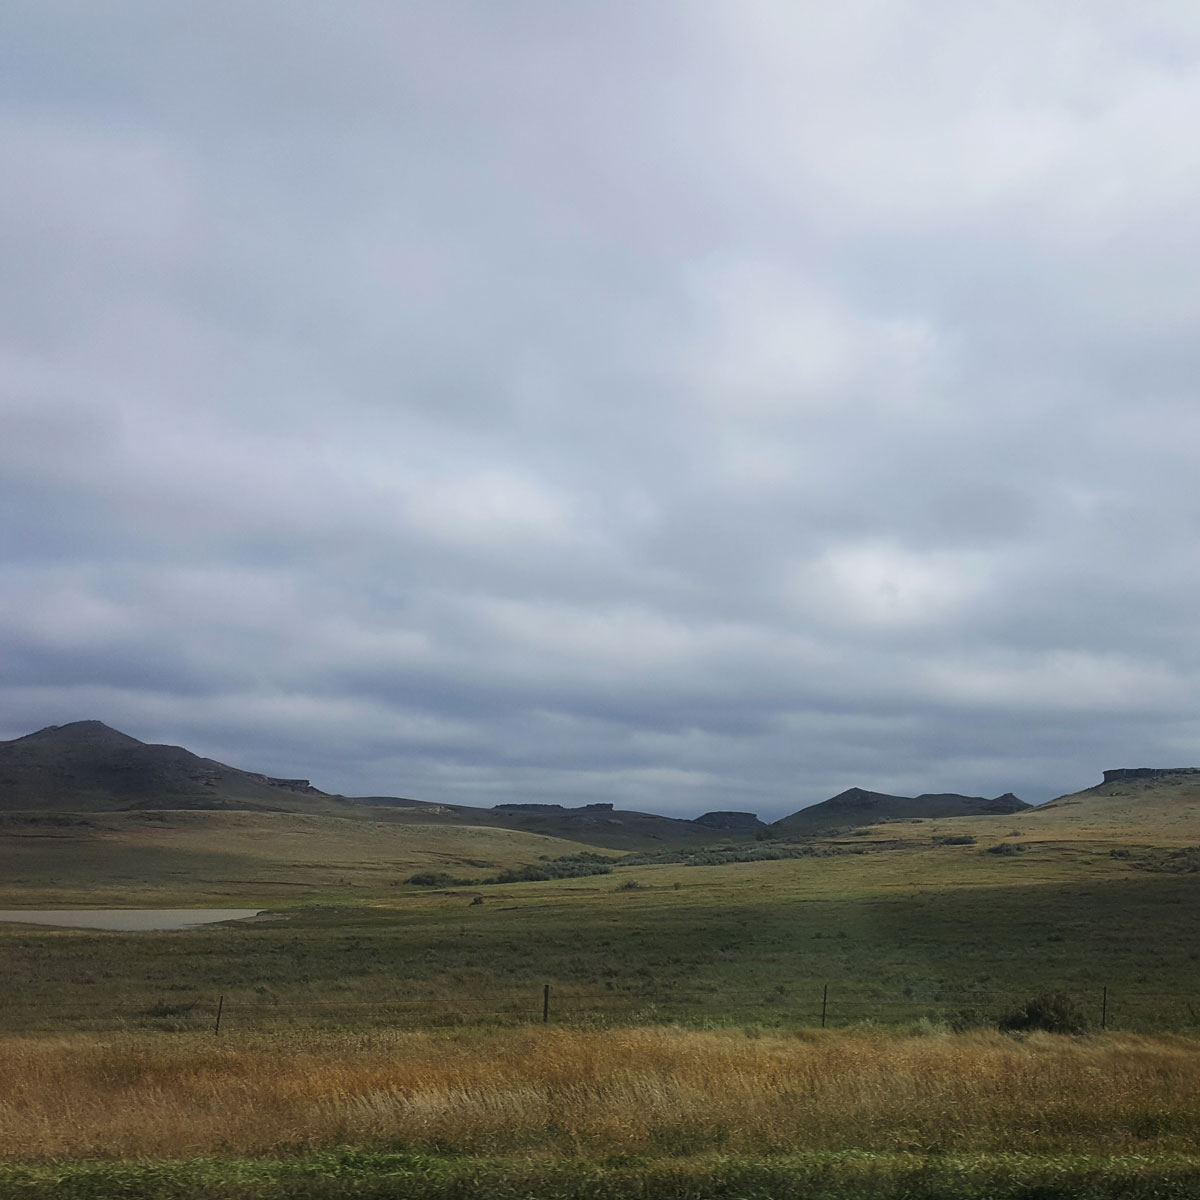 A view through a car window of buttes and hills under a cloudy sky in the distance across a grassy plain somewhere North of Belle Forche, South Dakota.